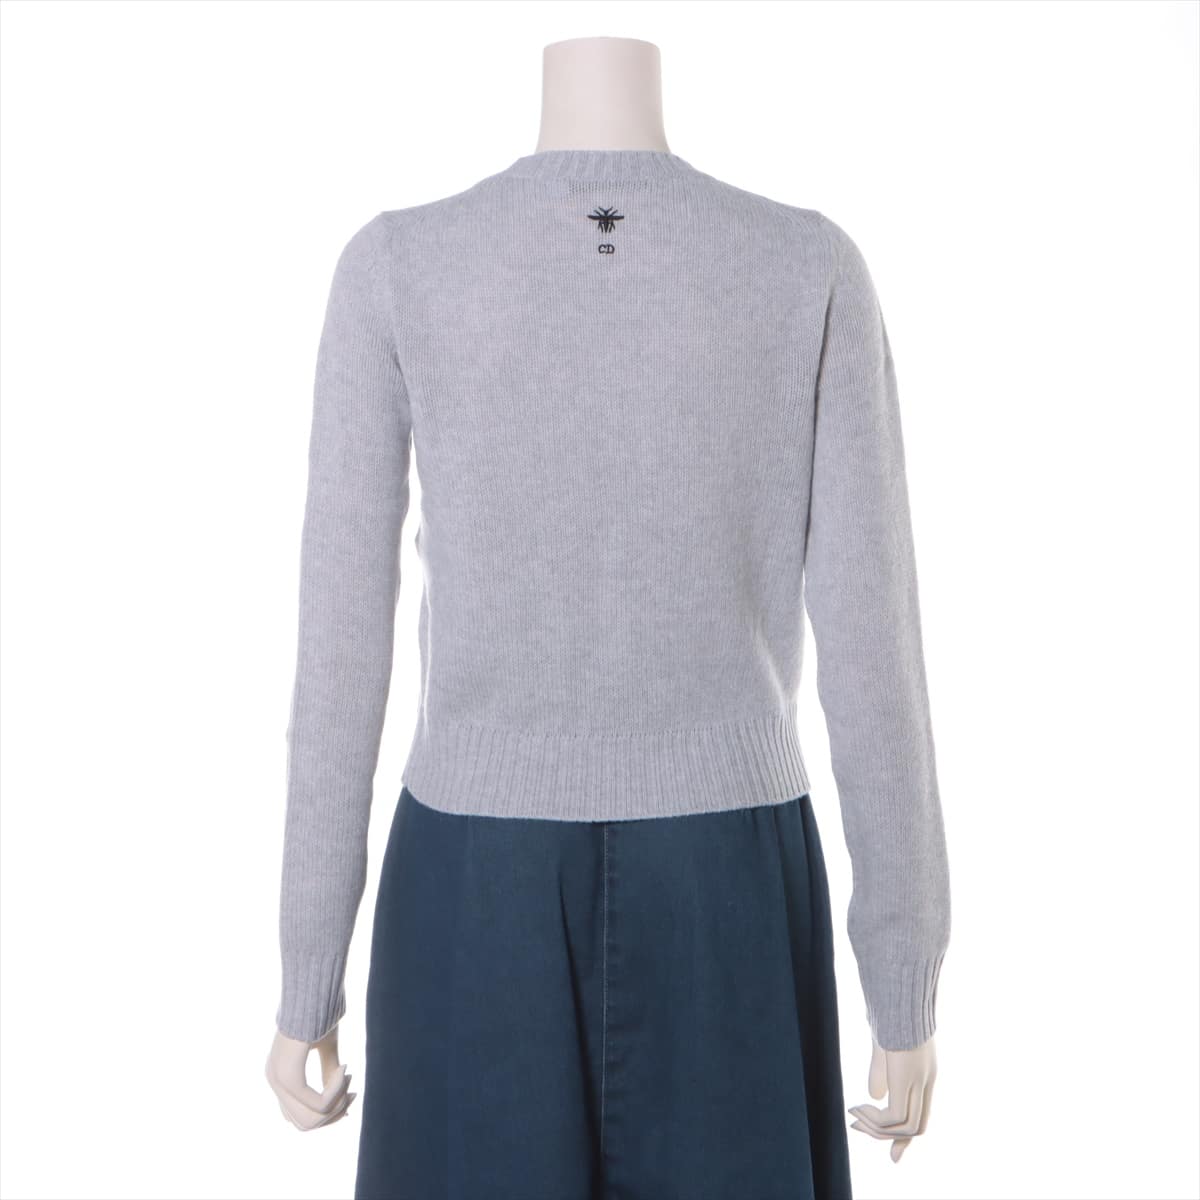 Christian Dior Cashmere Knit F34 Ladies' Grey  214S57AM011 BEE sting? Star